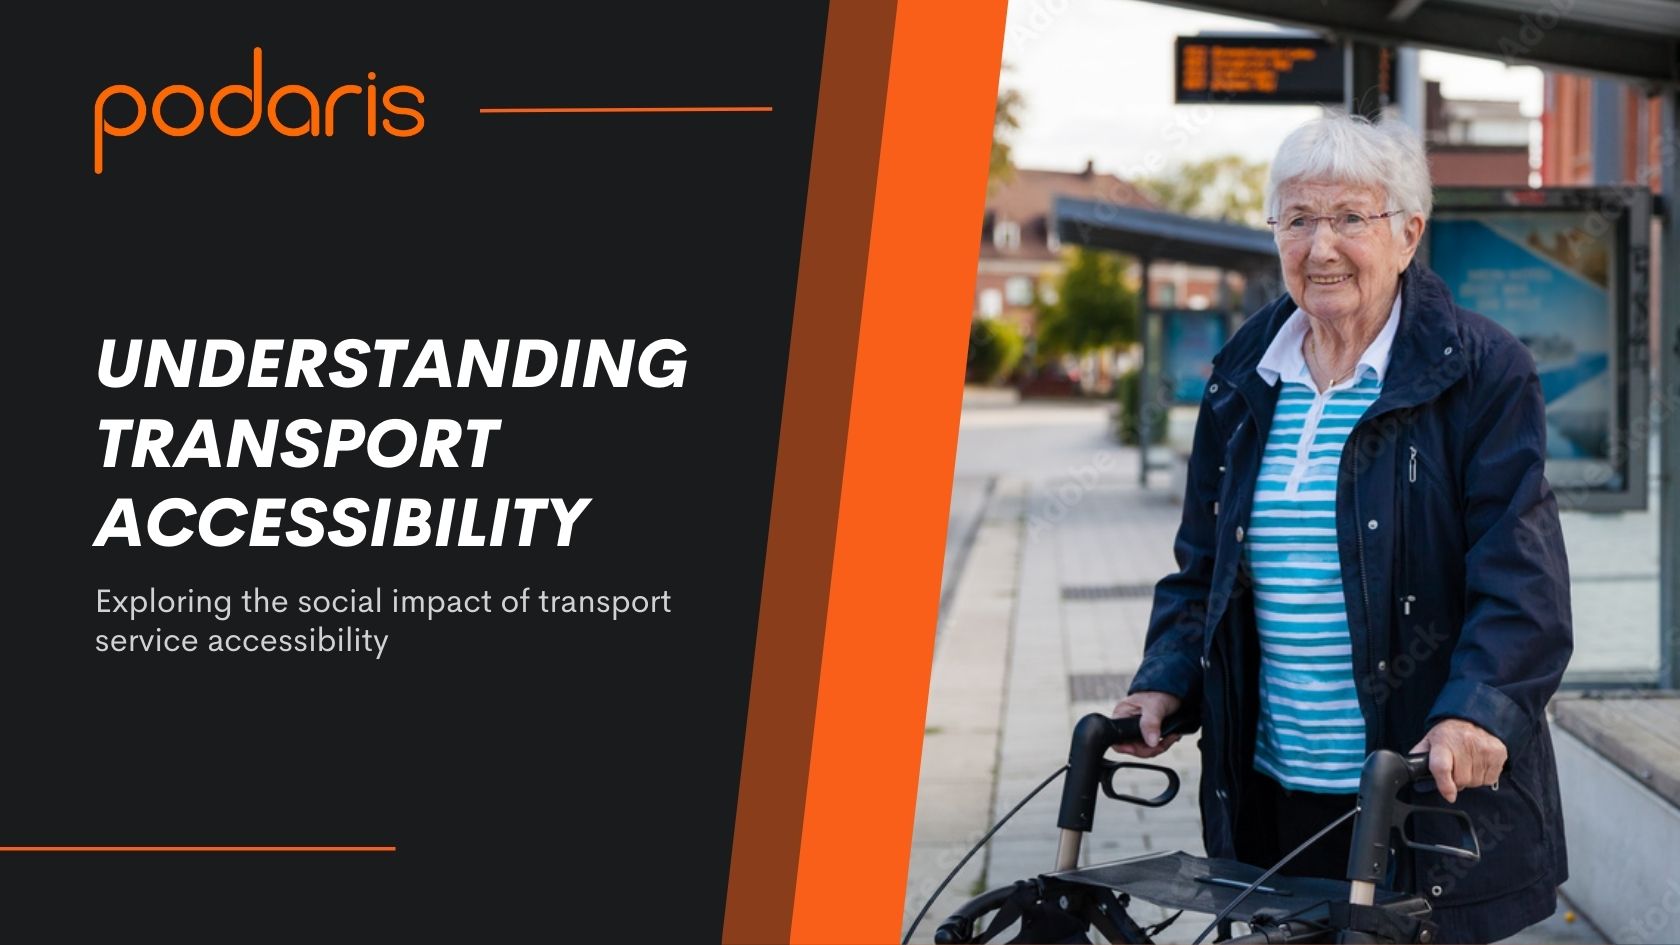 Exploring the impact of transport service accessibility